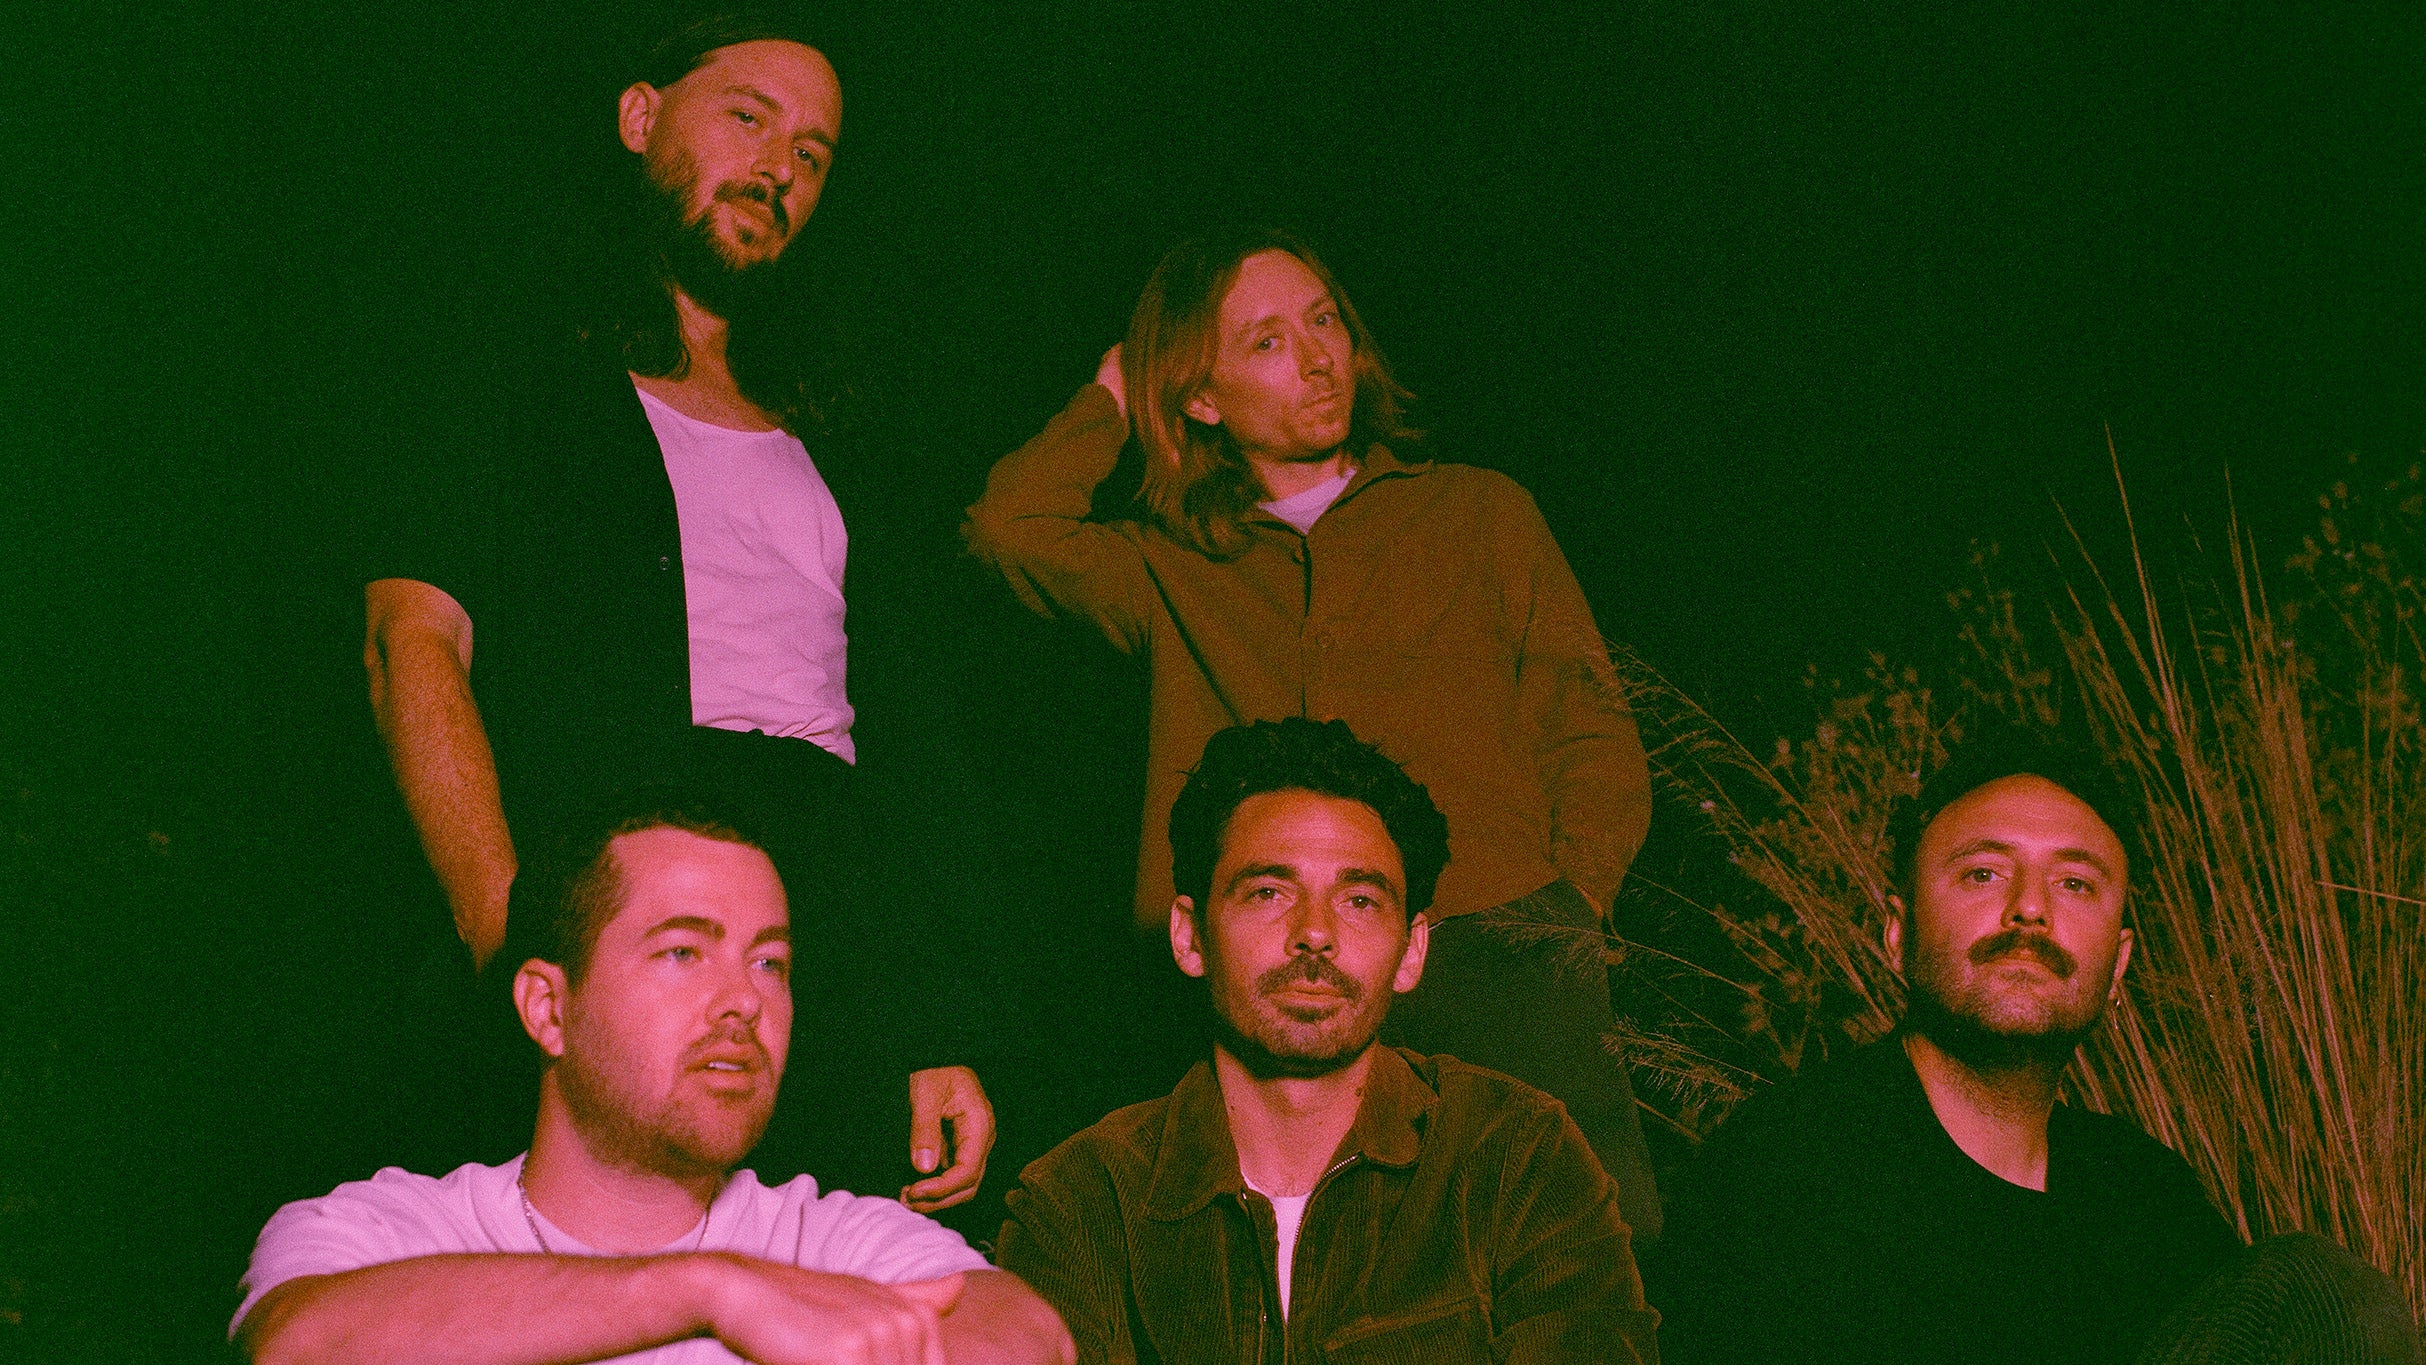 Local Natives - Time Will Wait For No One Tour free presale pa55w0rd for early tickets in Oakland